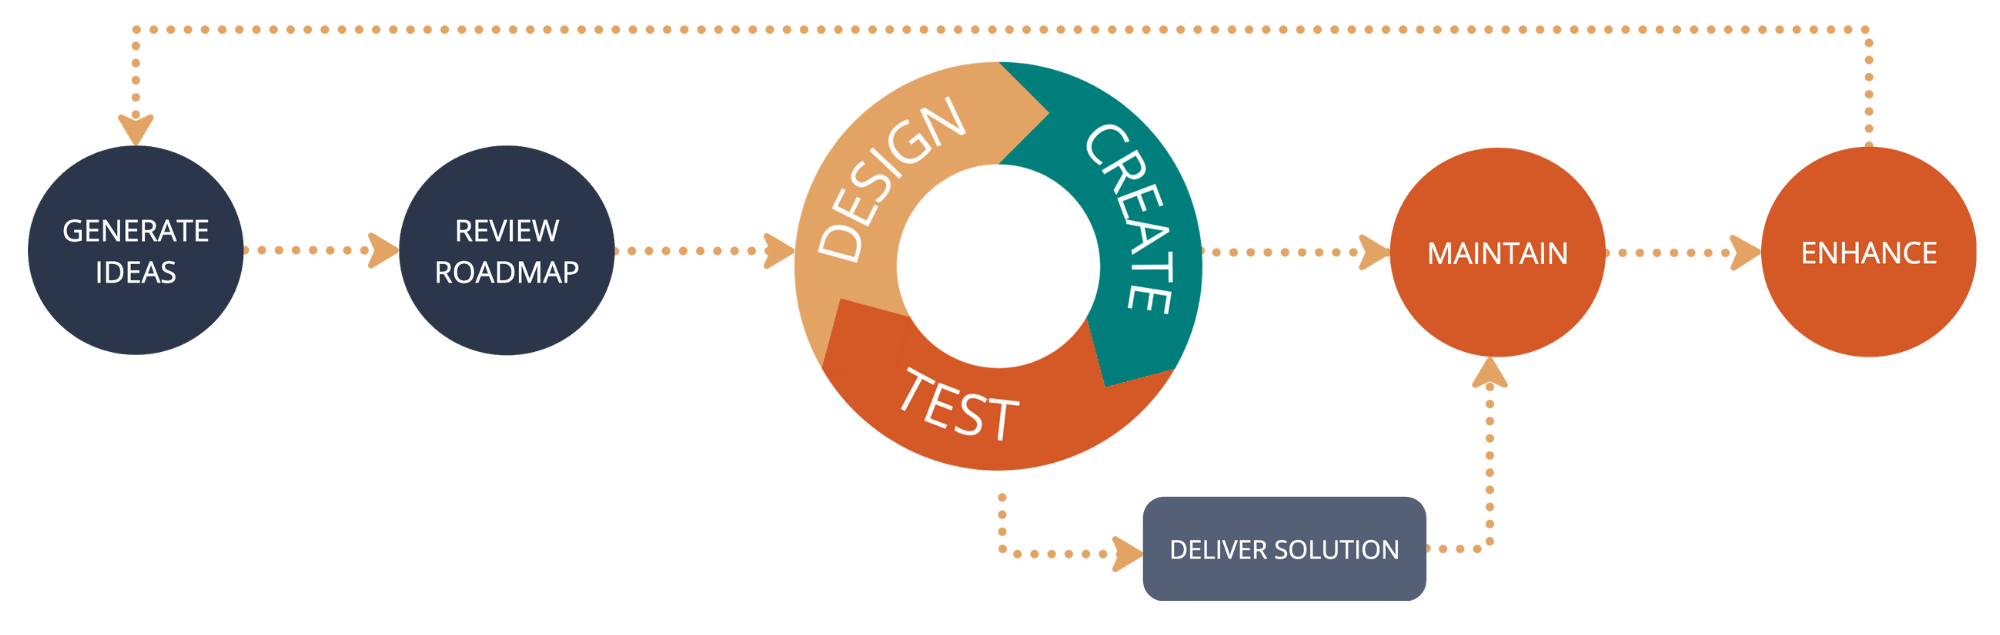 An image of a software building process that goes as follows: generate ideas, review roadmap, DESIGN, CREATE, TEST, deliver solution, maintain, enhance